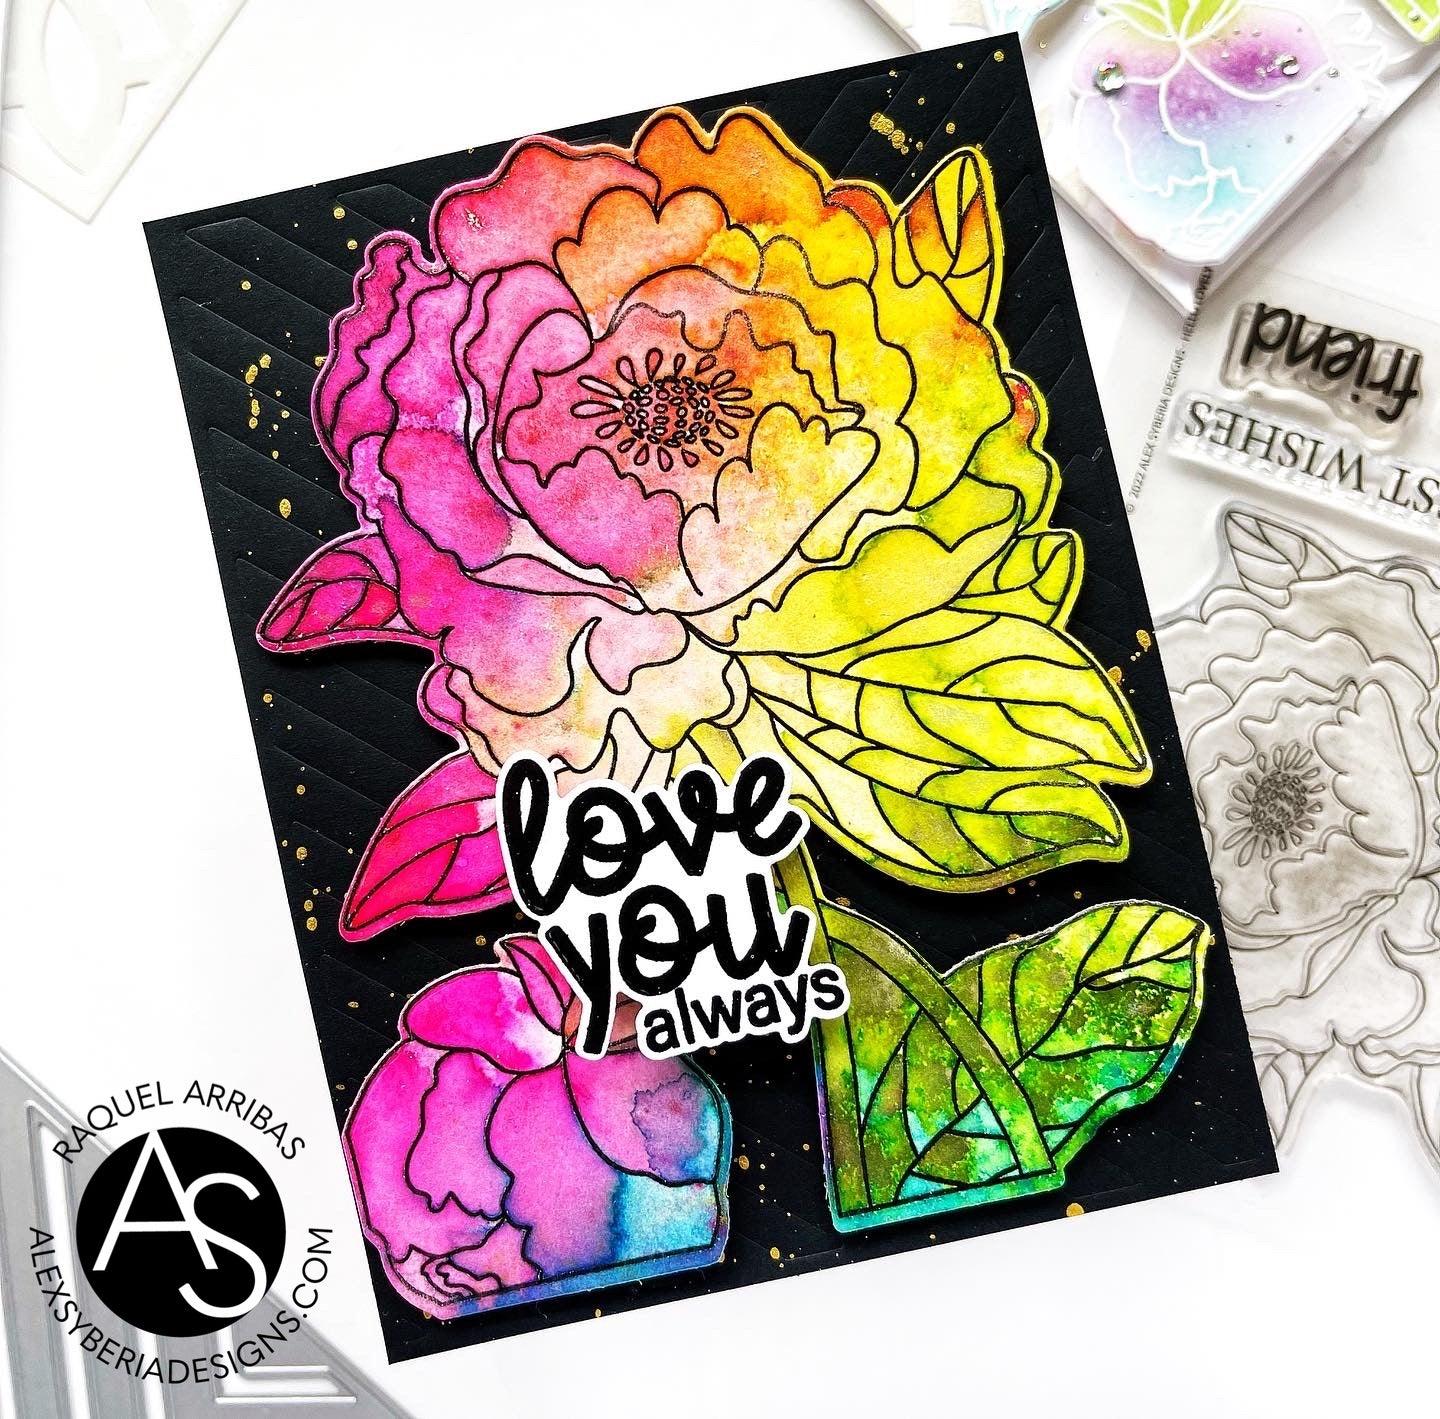 alex-syberia-designs-stamps-hello-lovely-fancy-background-die-cover-cardmaking-tutorials-tips-rainbow-cards-blacl-background-diy-cards-handmadecards